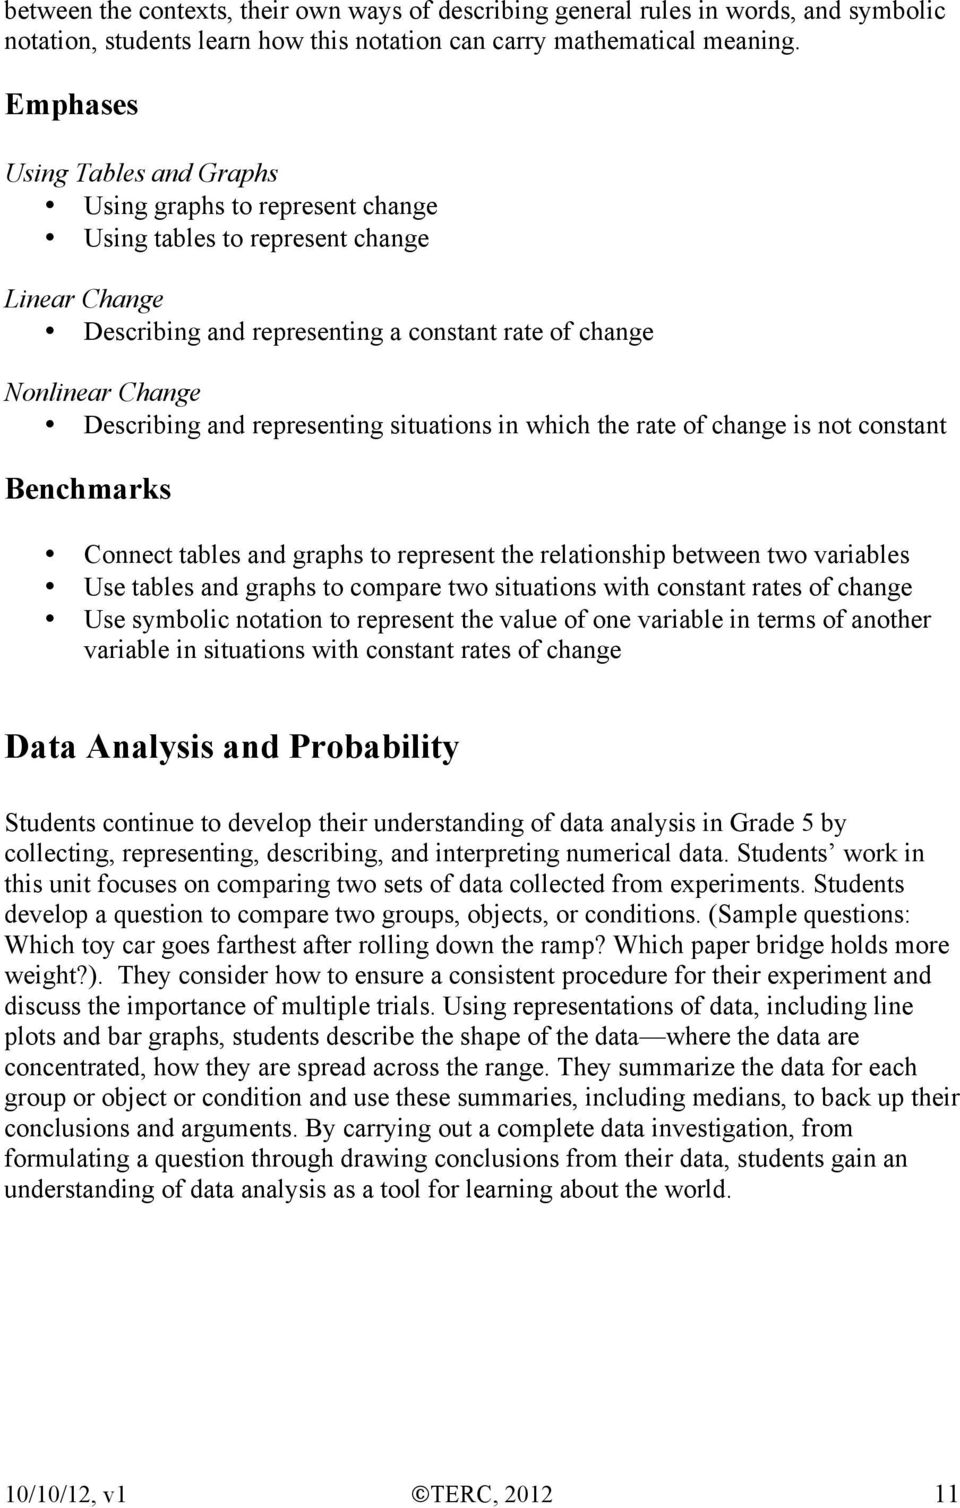 representing situations in which the rate of change is not constant Benchmarks Connect tables and graphs to represent the relationship between two variables Use tables and graphs to compare two